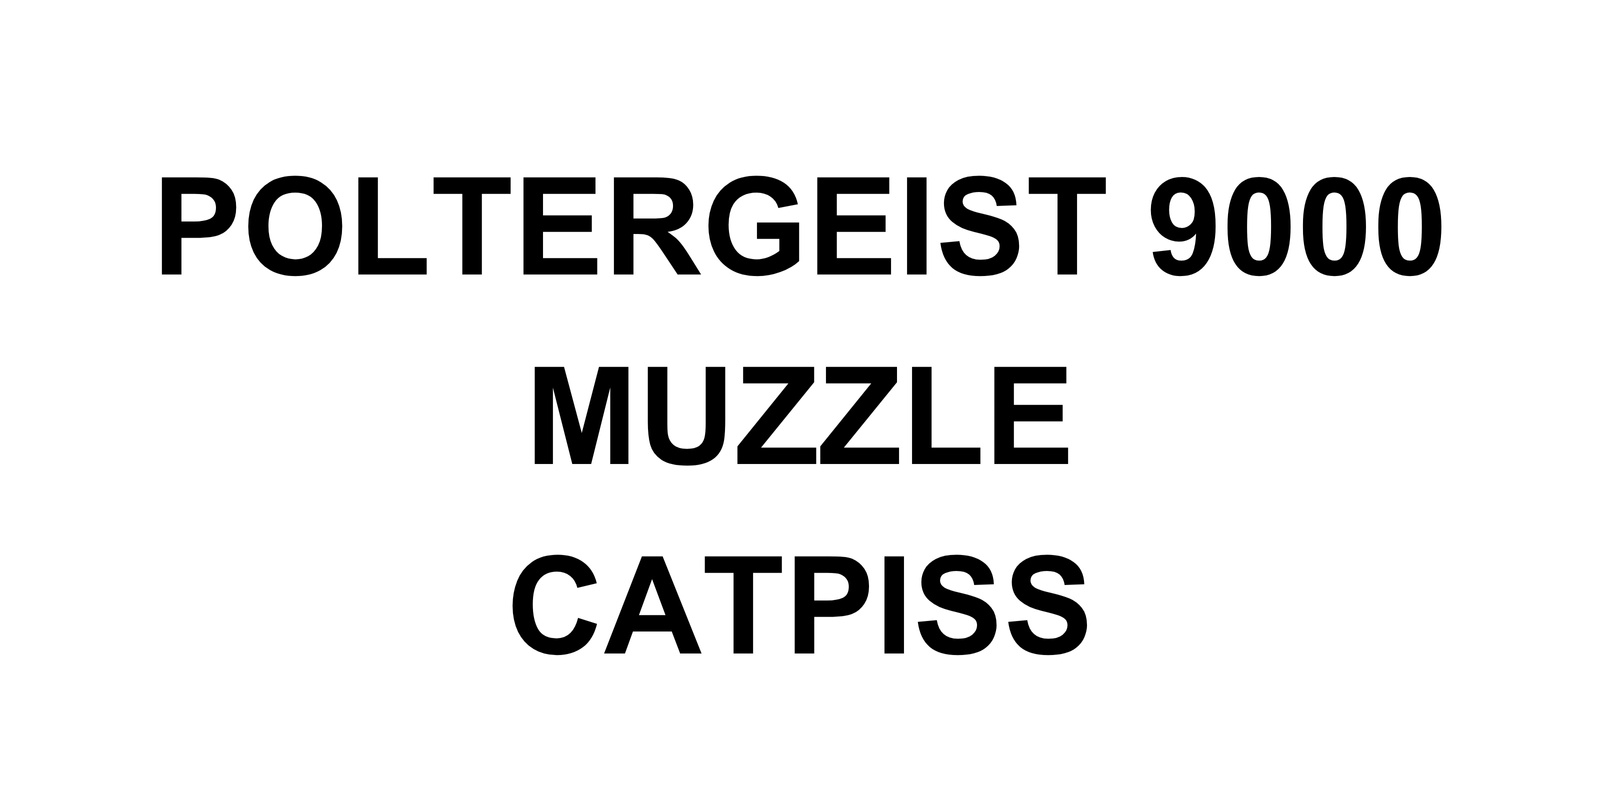 Banner image for POLTERGEIST 9000, MUZZLE and CATPISS